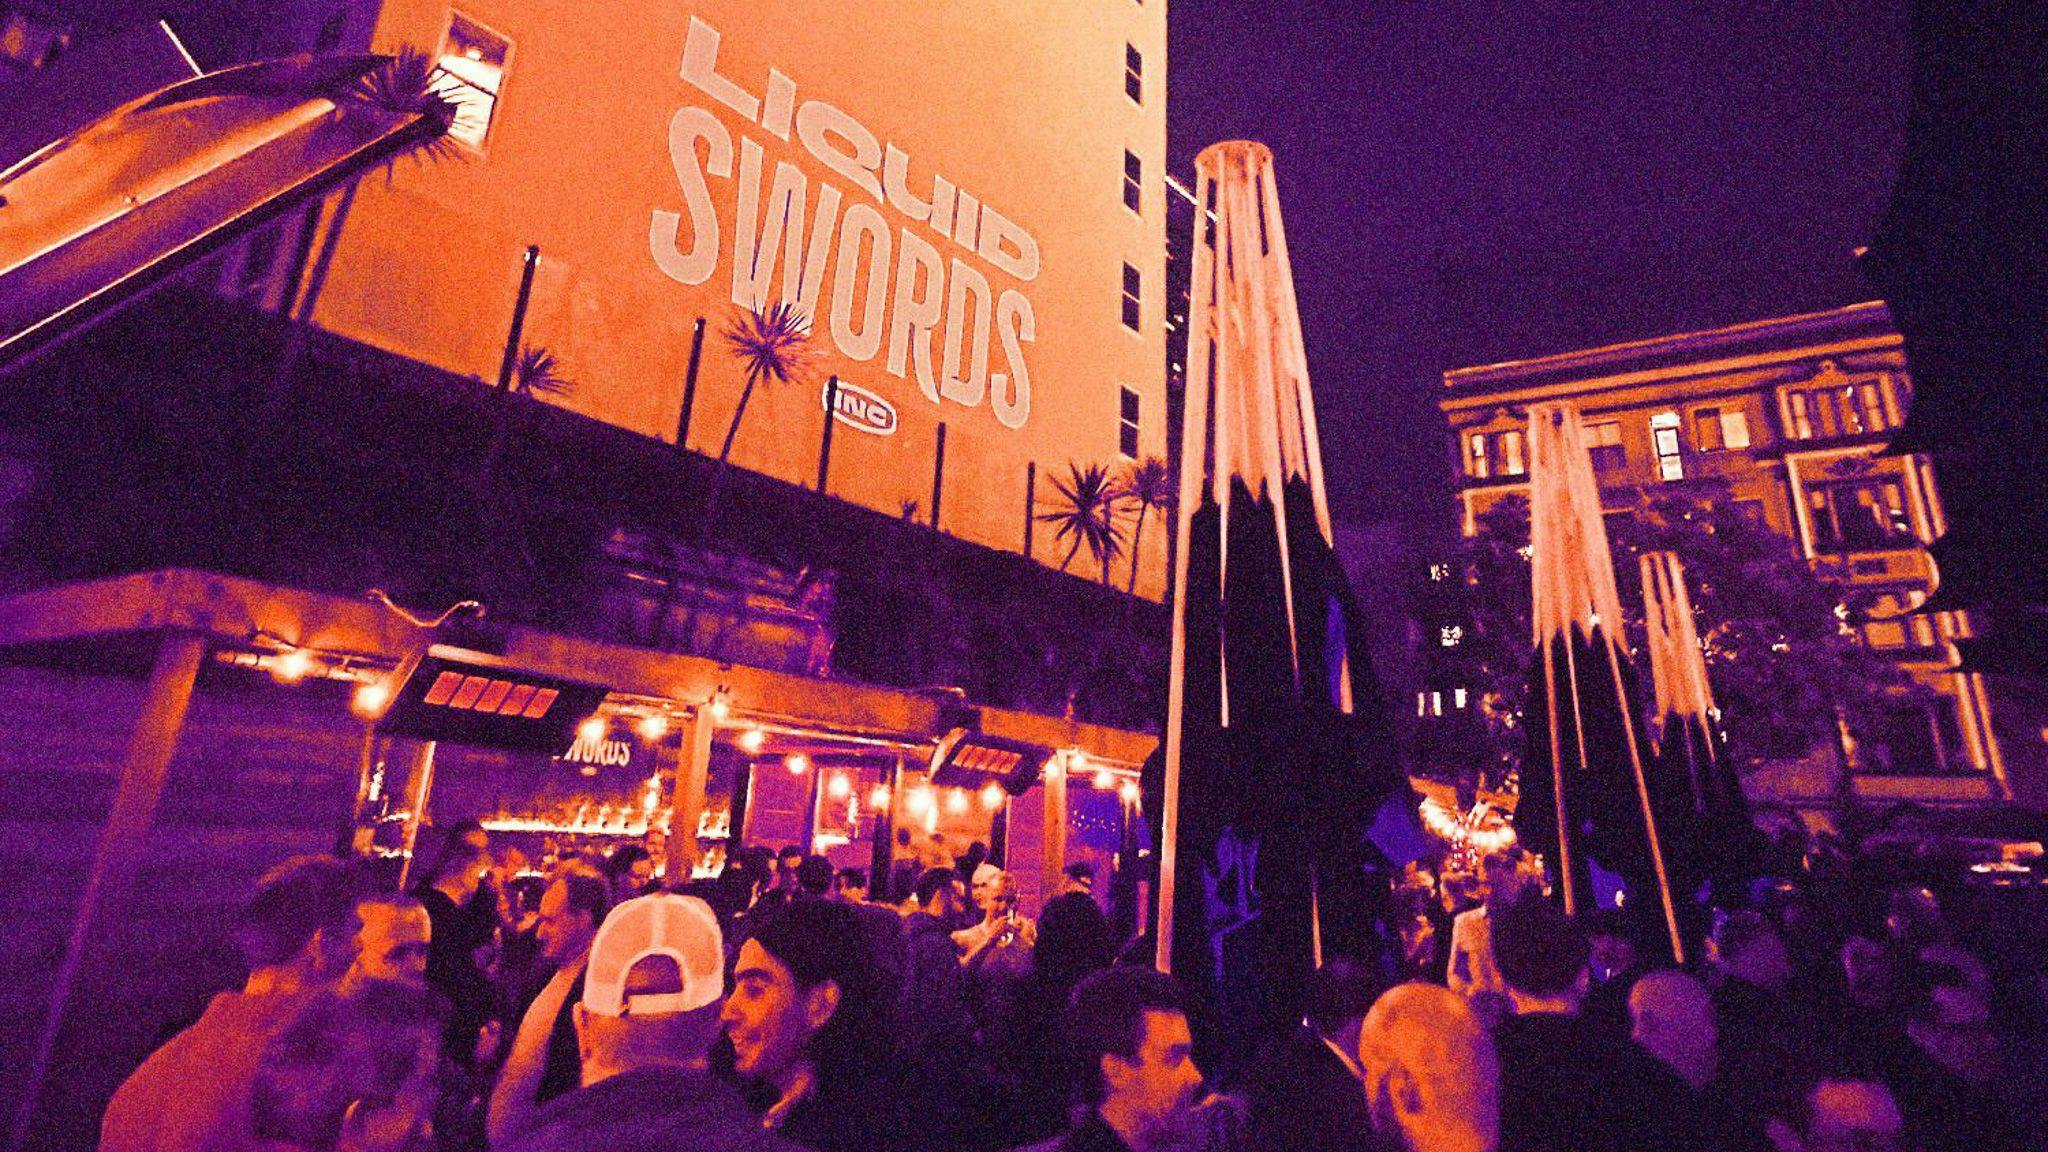 A crowd stans in front of a sign reading Liquid Swords, photo has an orange and purple treatment